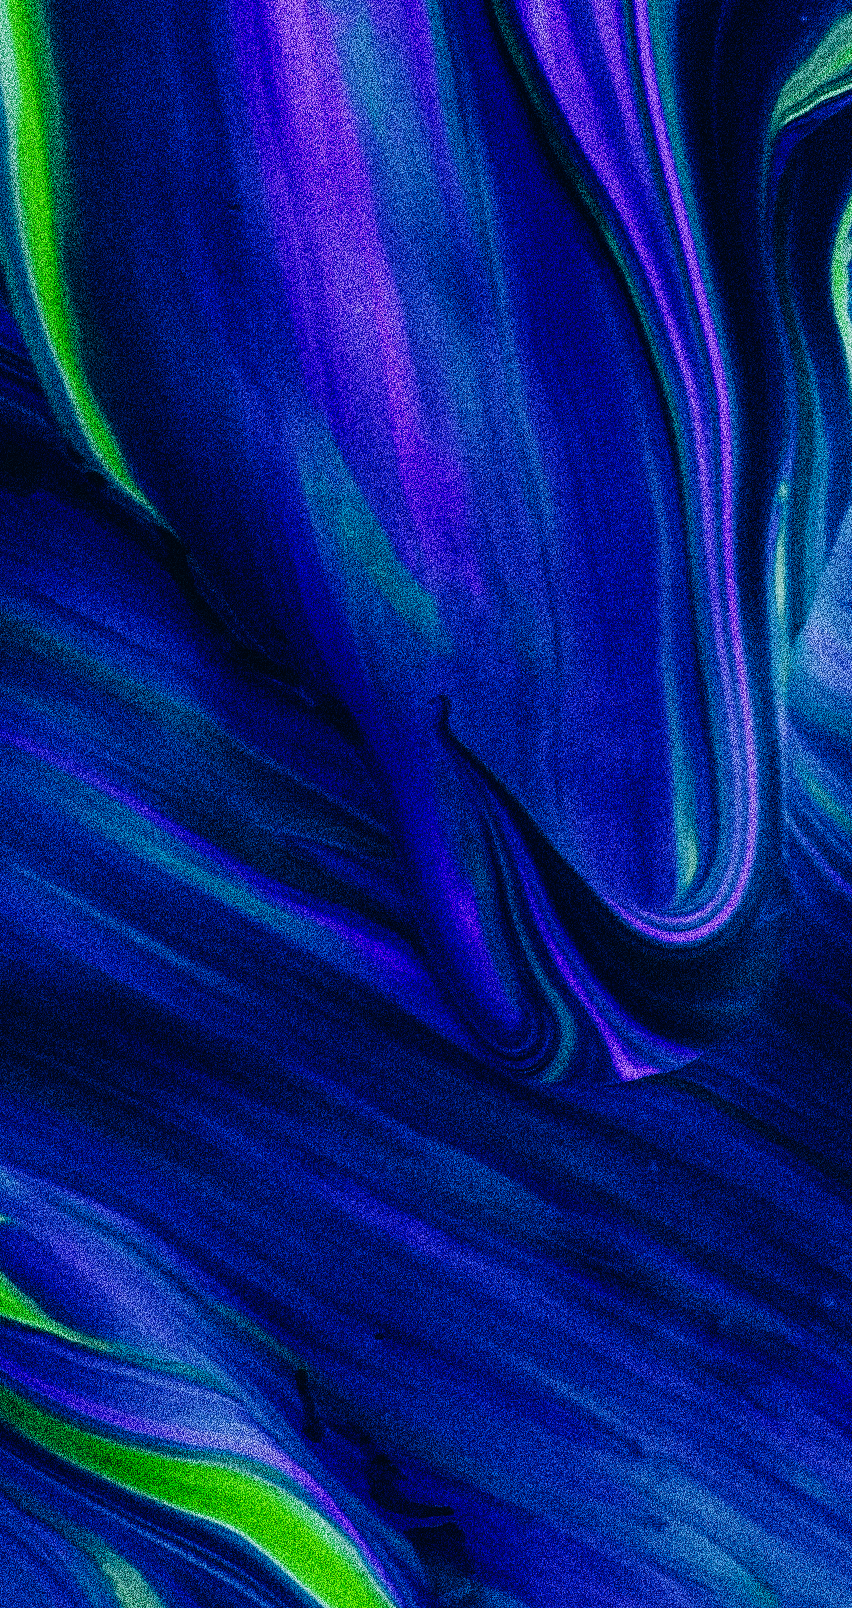 l phone wallpapers,blue,purple,violet,electric blue,water